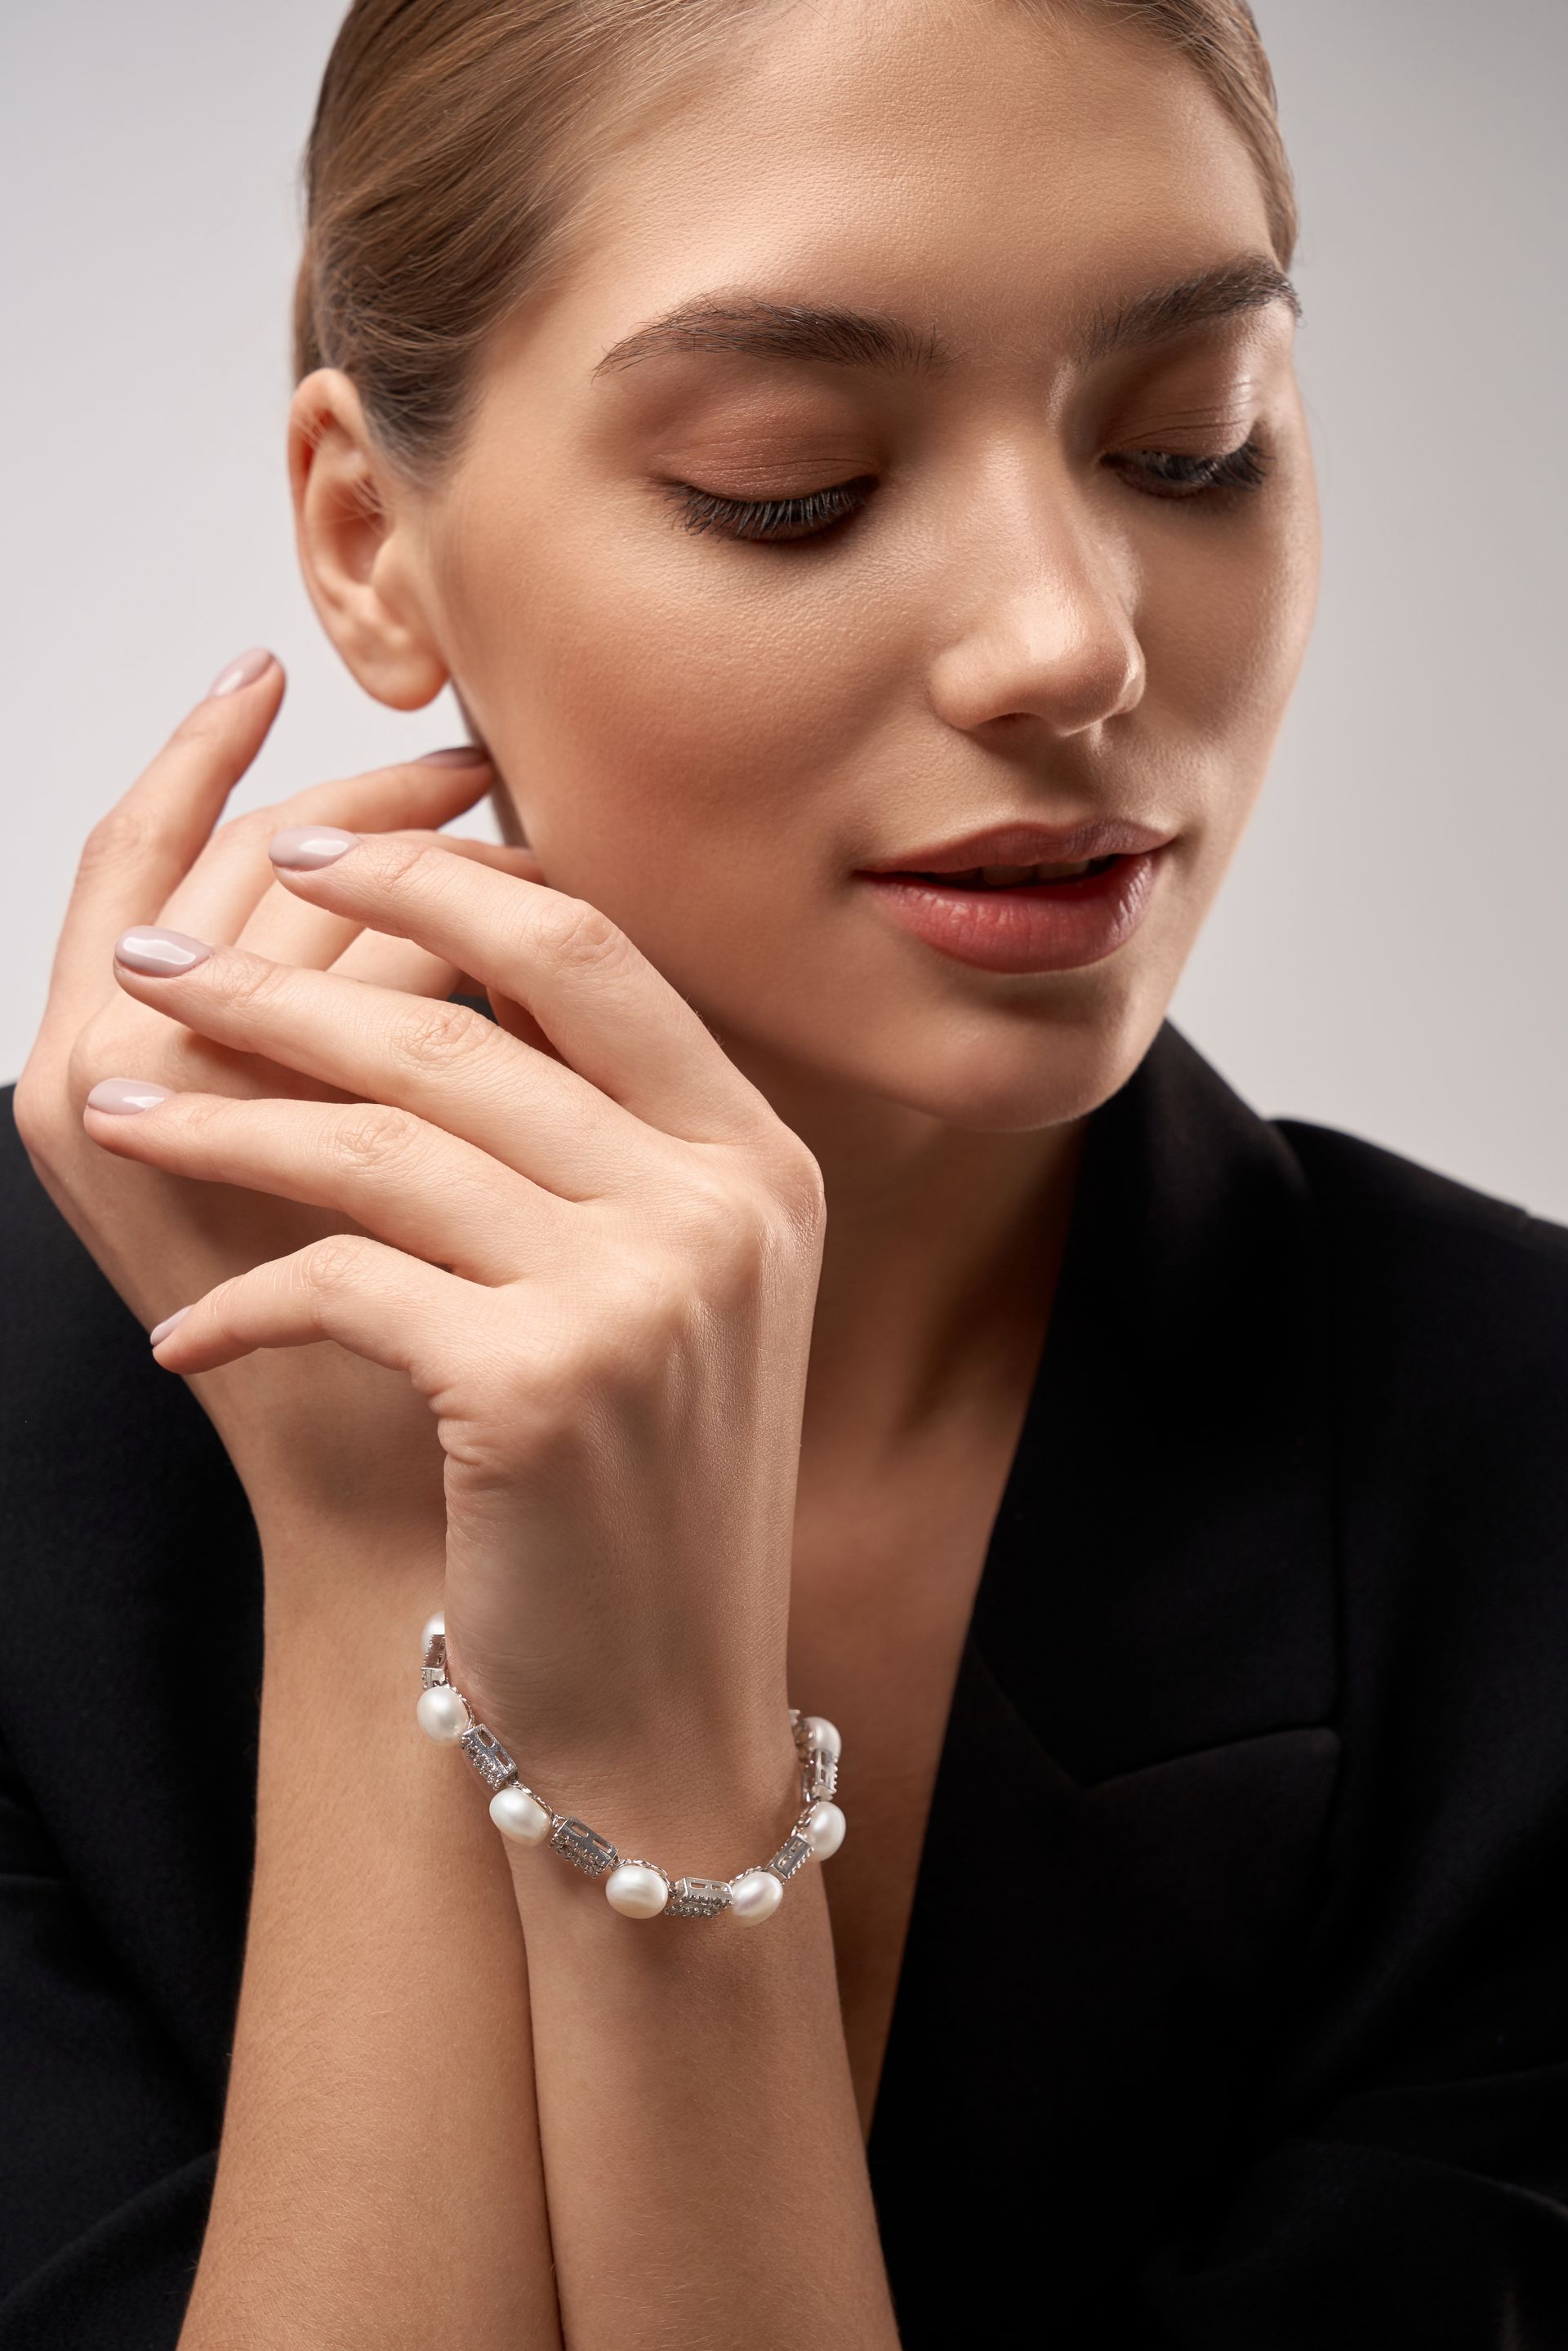 model with a pearl bracelet on her hand